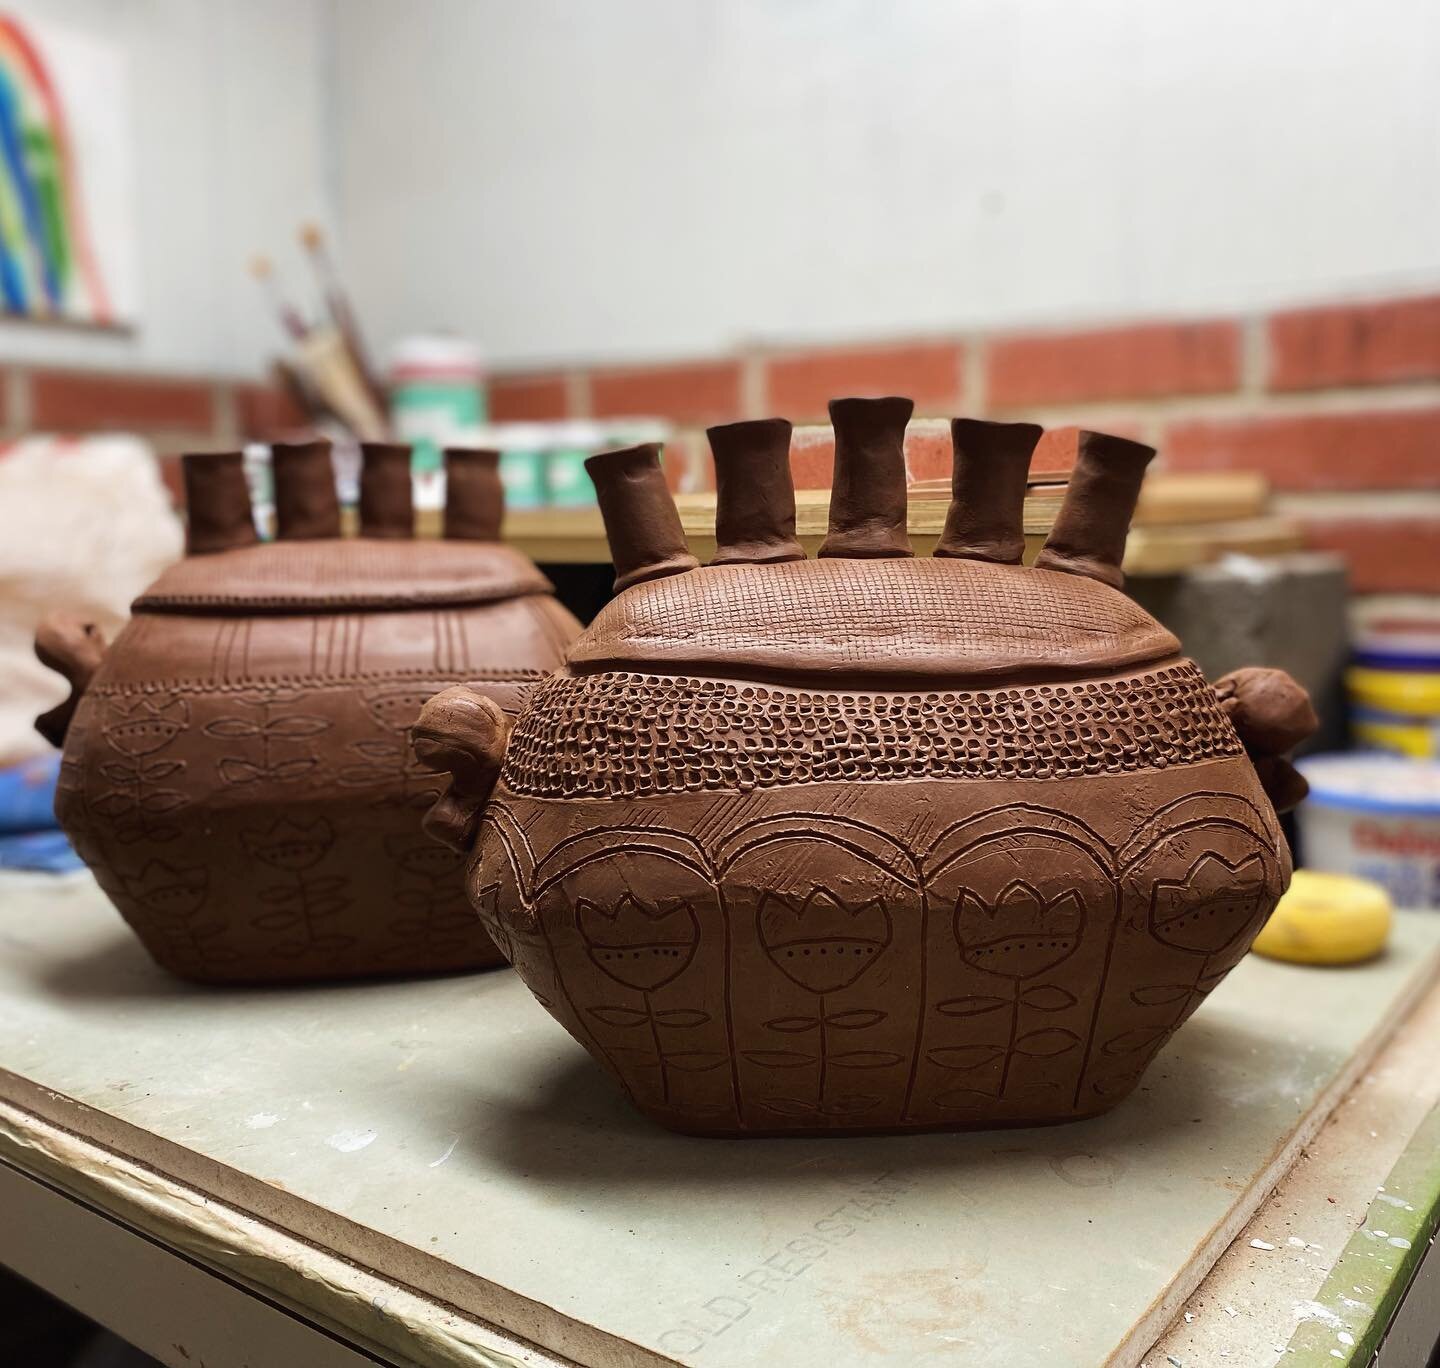 Tulip Vases 

&yen;&yen;&yen;

Im happy with how these are turning out. I like the shortened oval shape. I imagine my friend @farmhandfarm filling them with her tulips this summer. I like carving at this hardness. It feels like chocolate and the colo